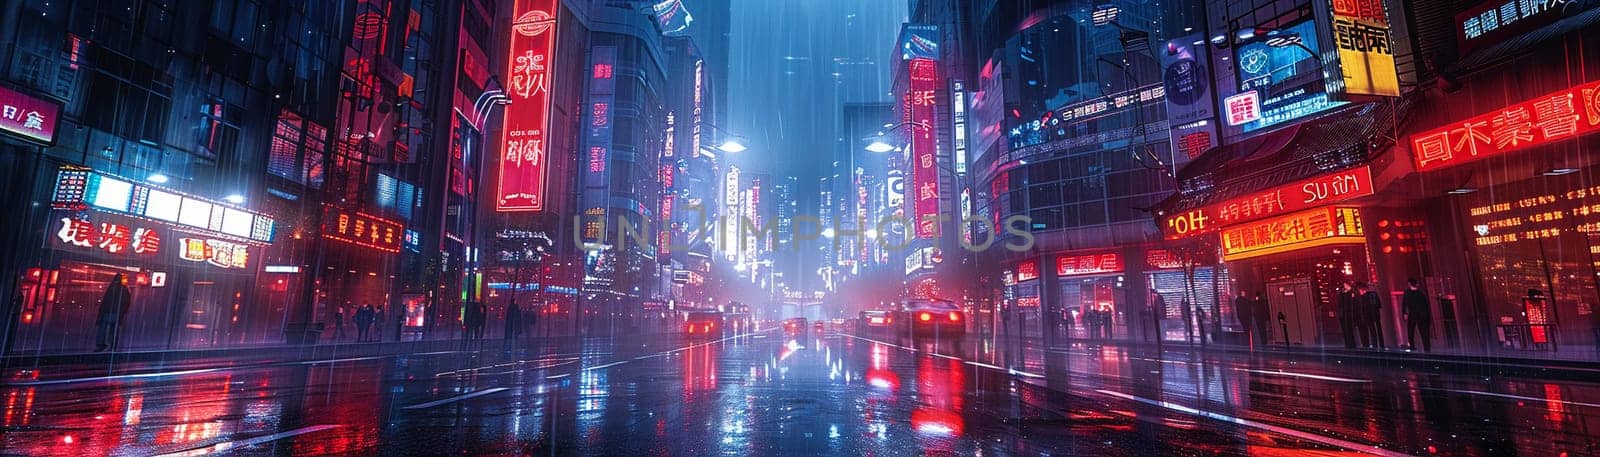 Dystopian cityscape with neon signs and rain-slick streets, illustrated in a cyberpunk anime style.